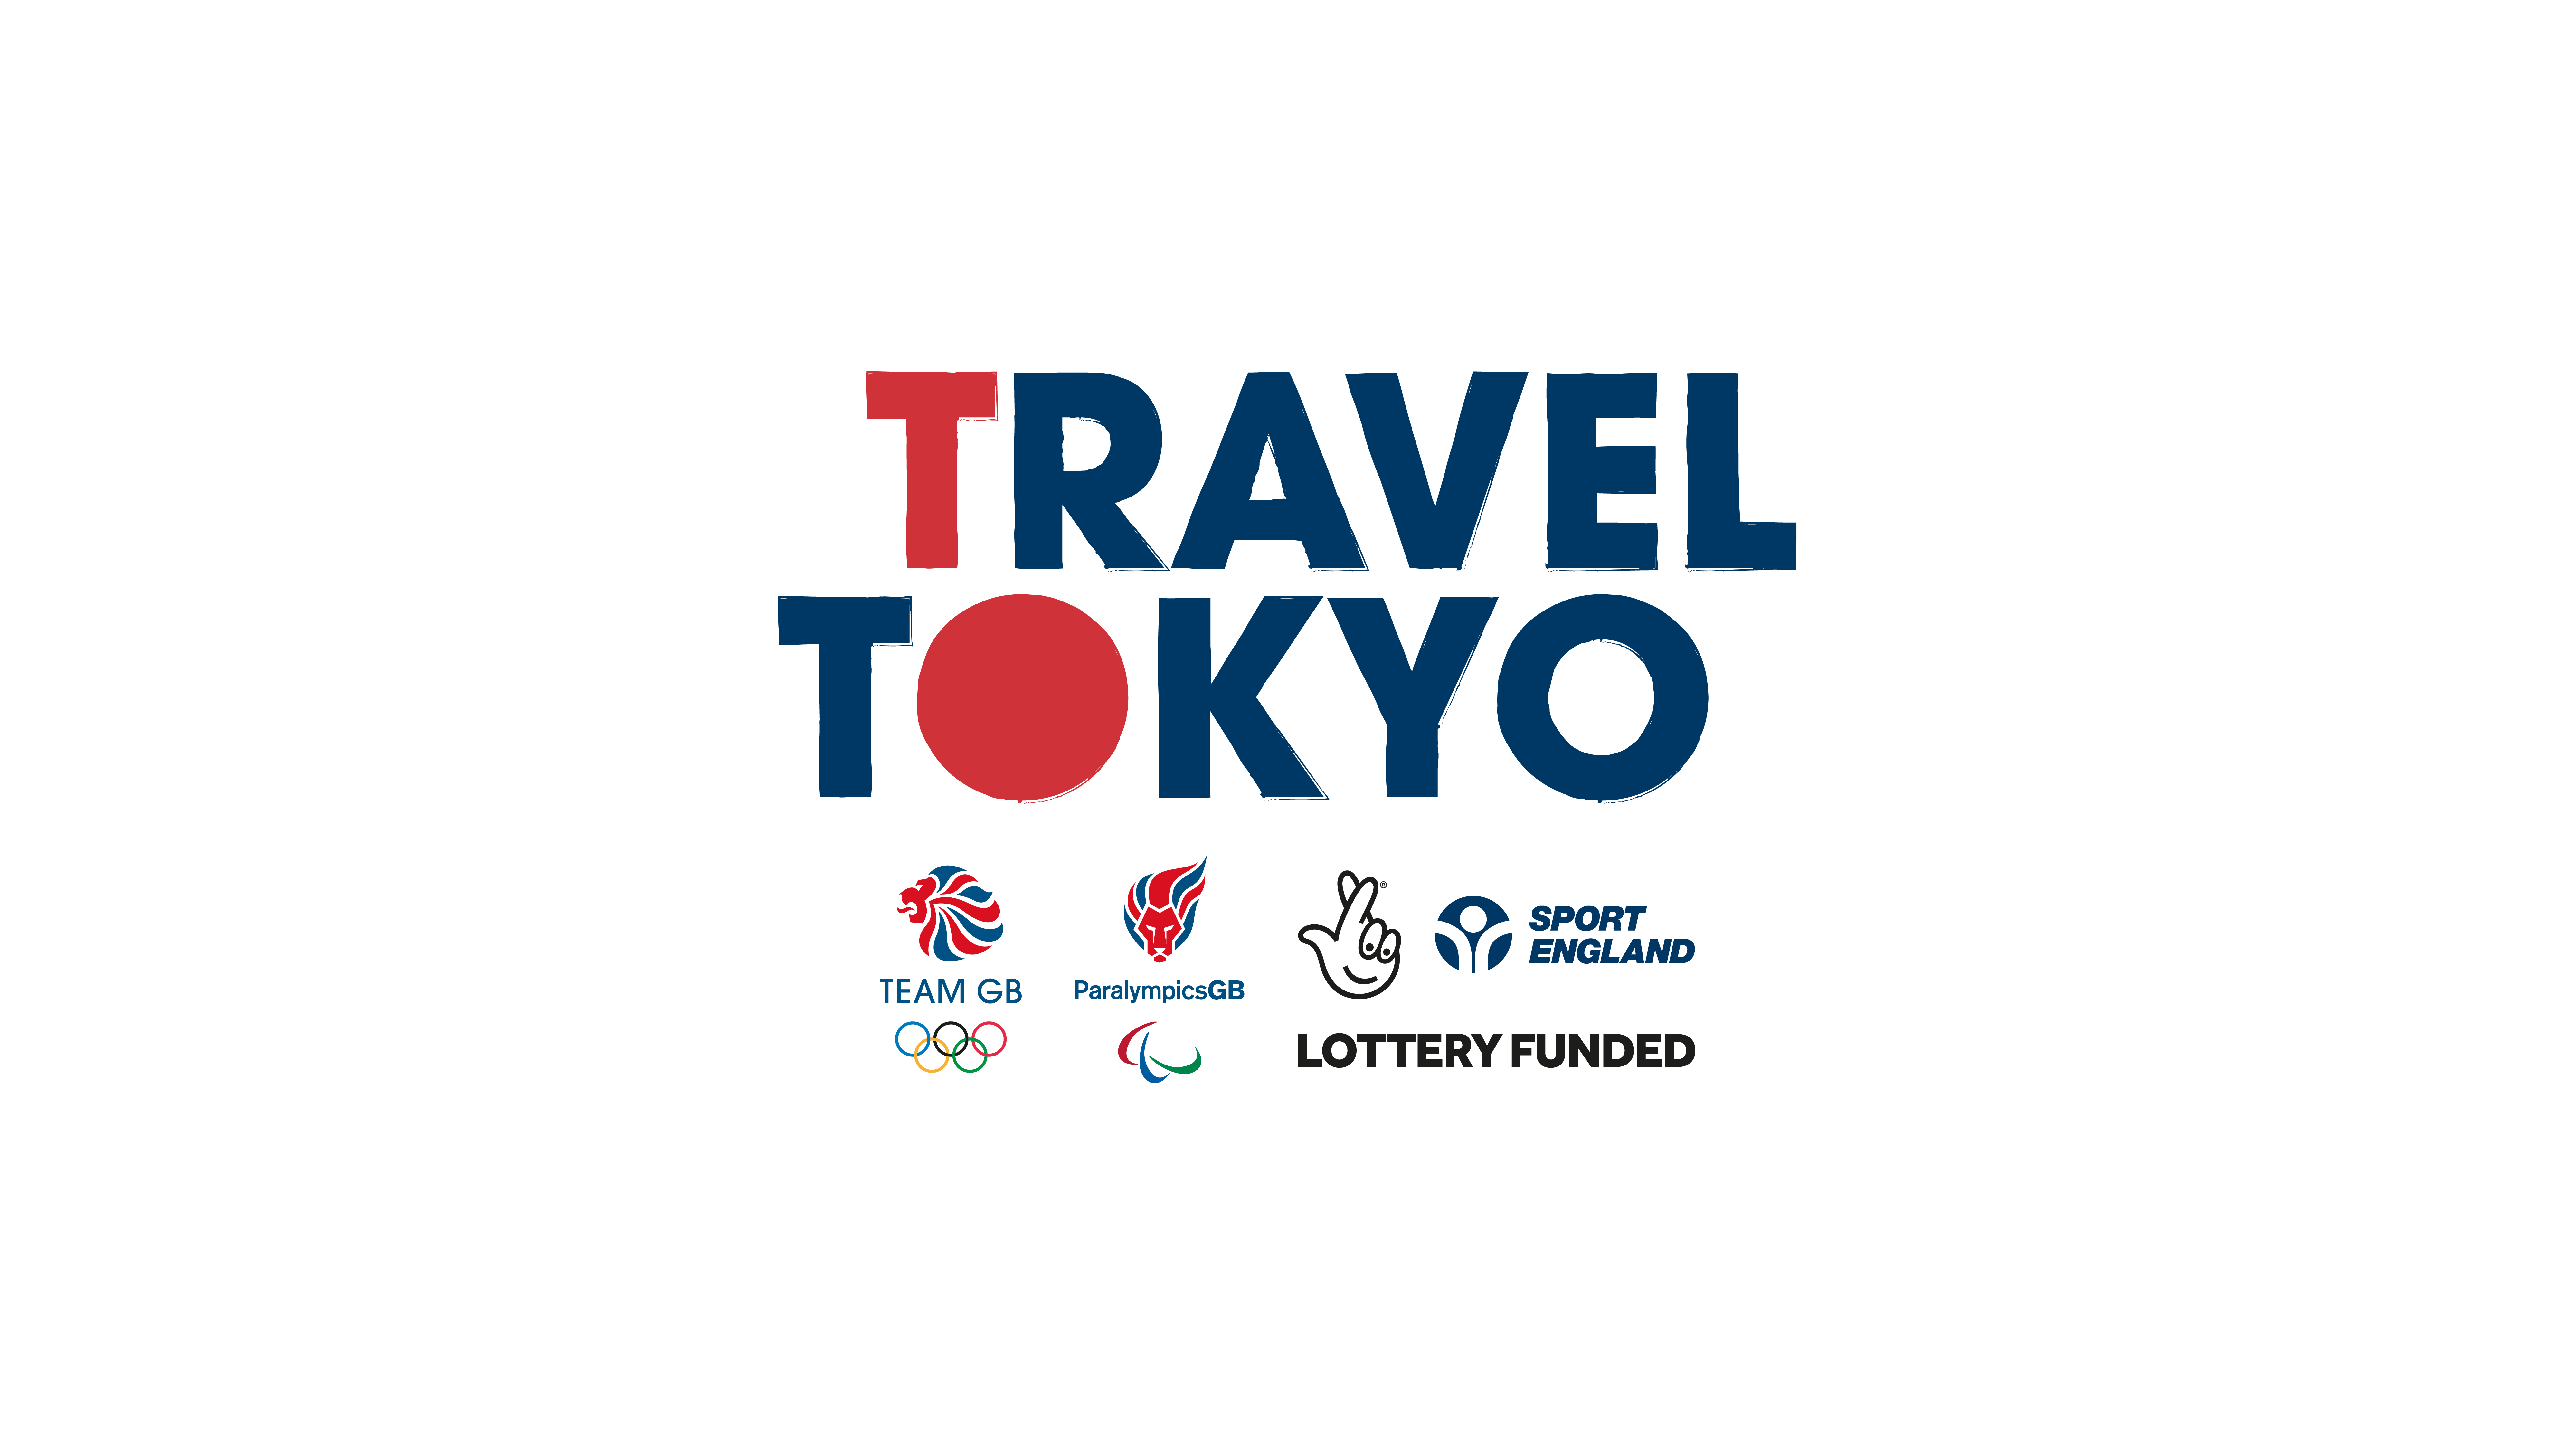 Help us understand the impact of Travel to Tokyo